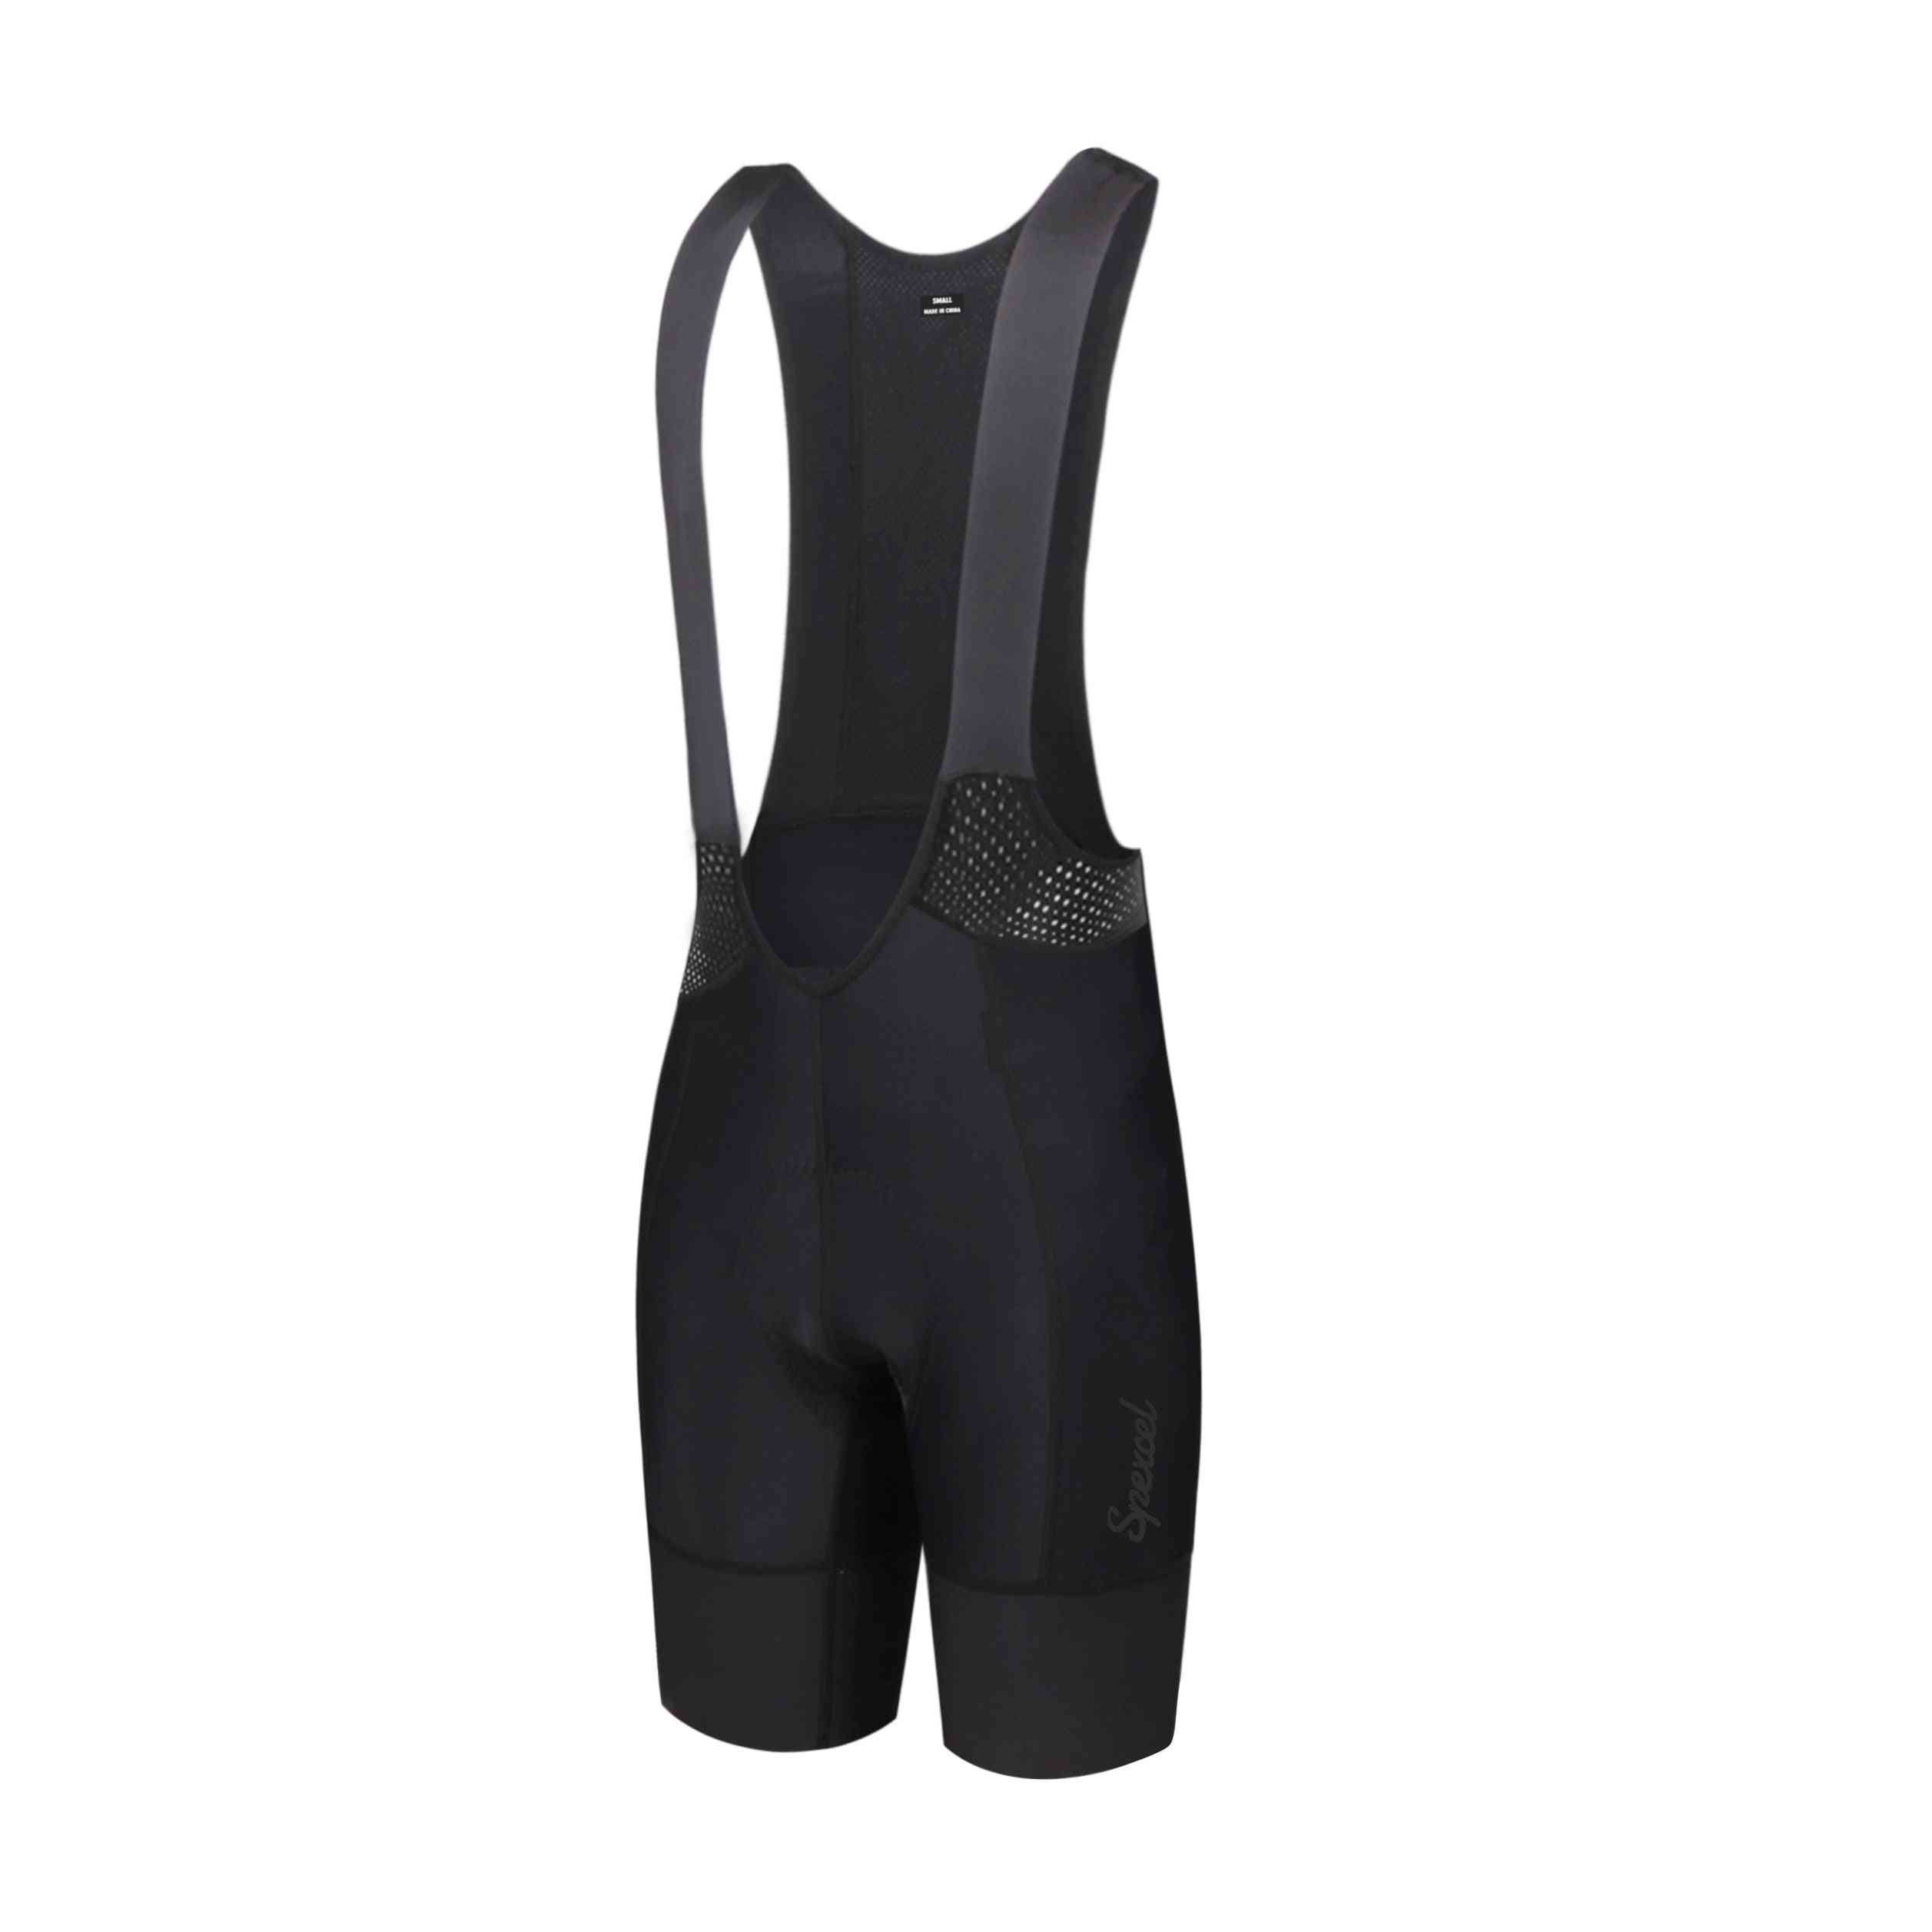 Bib Shorts Race Fit Cycling Bottom With Italy High Density Pad.